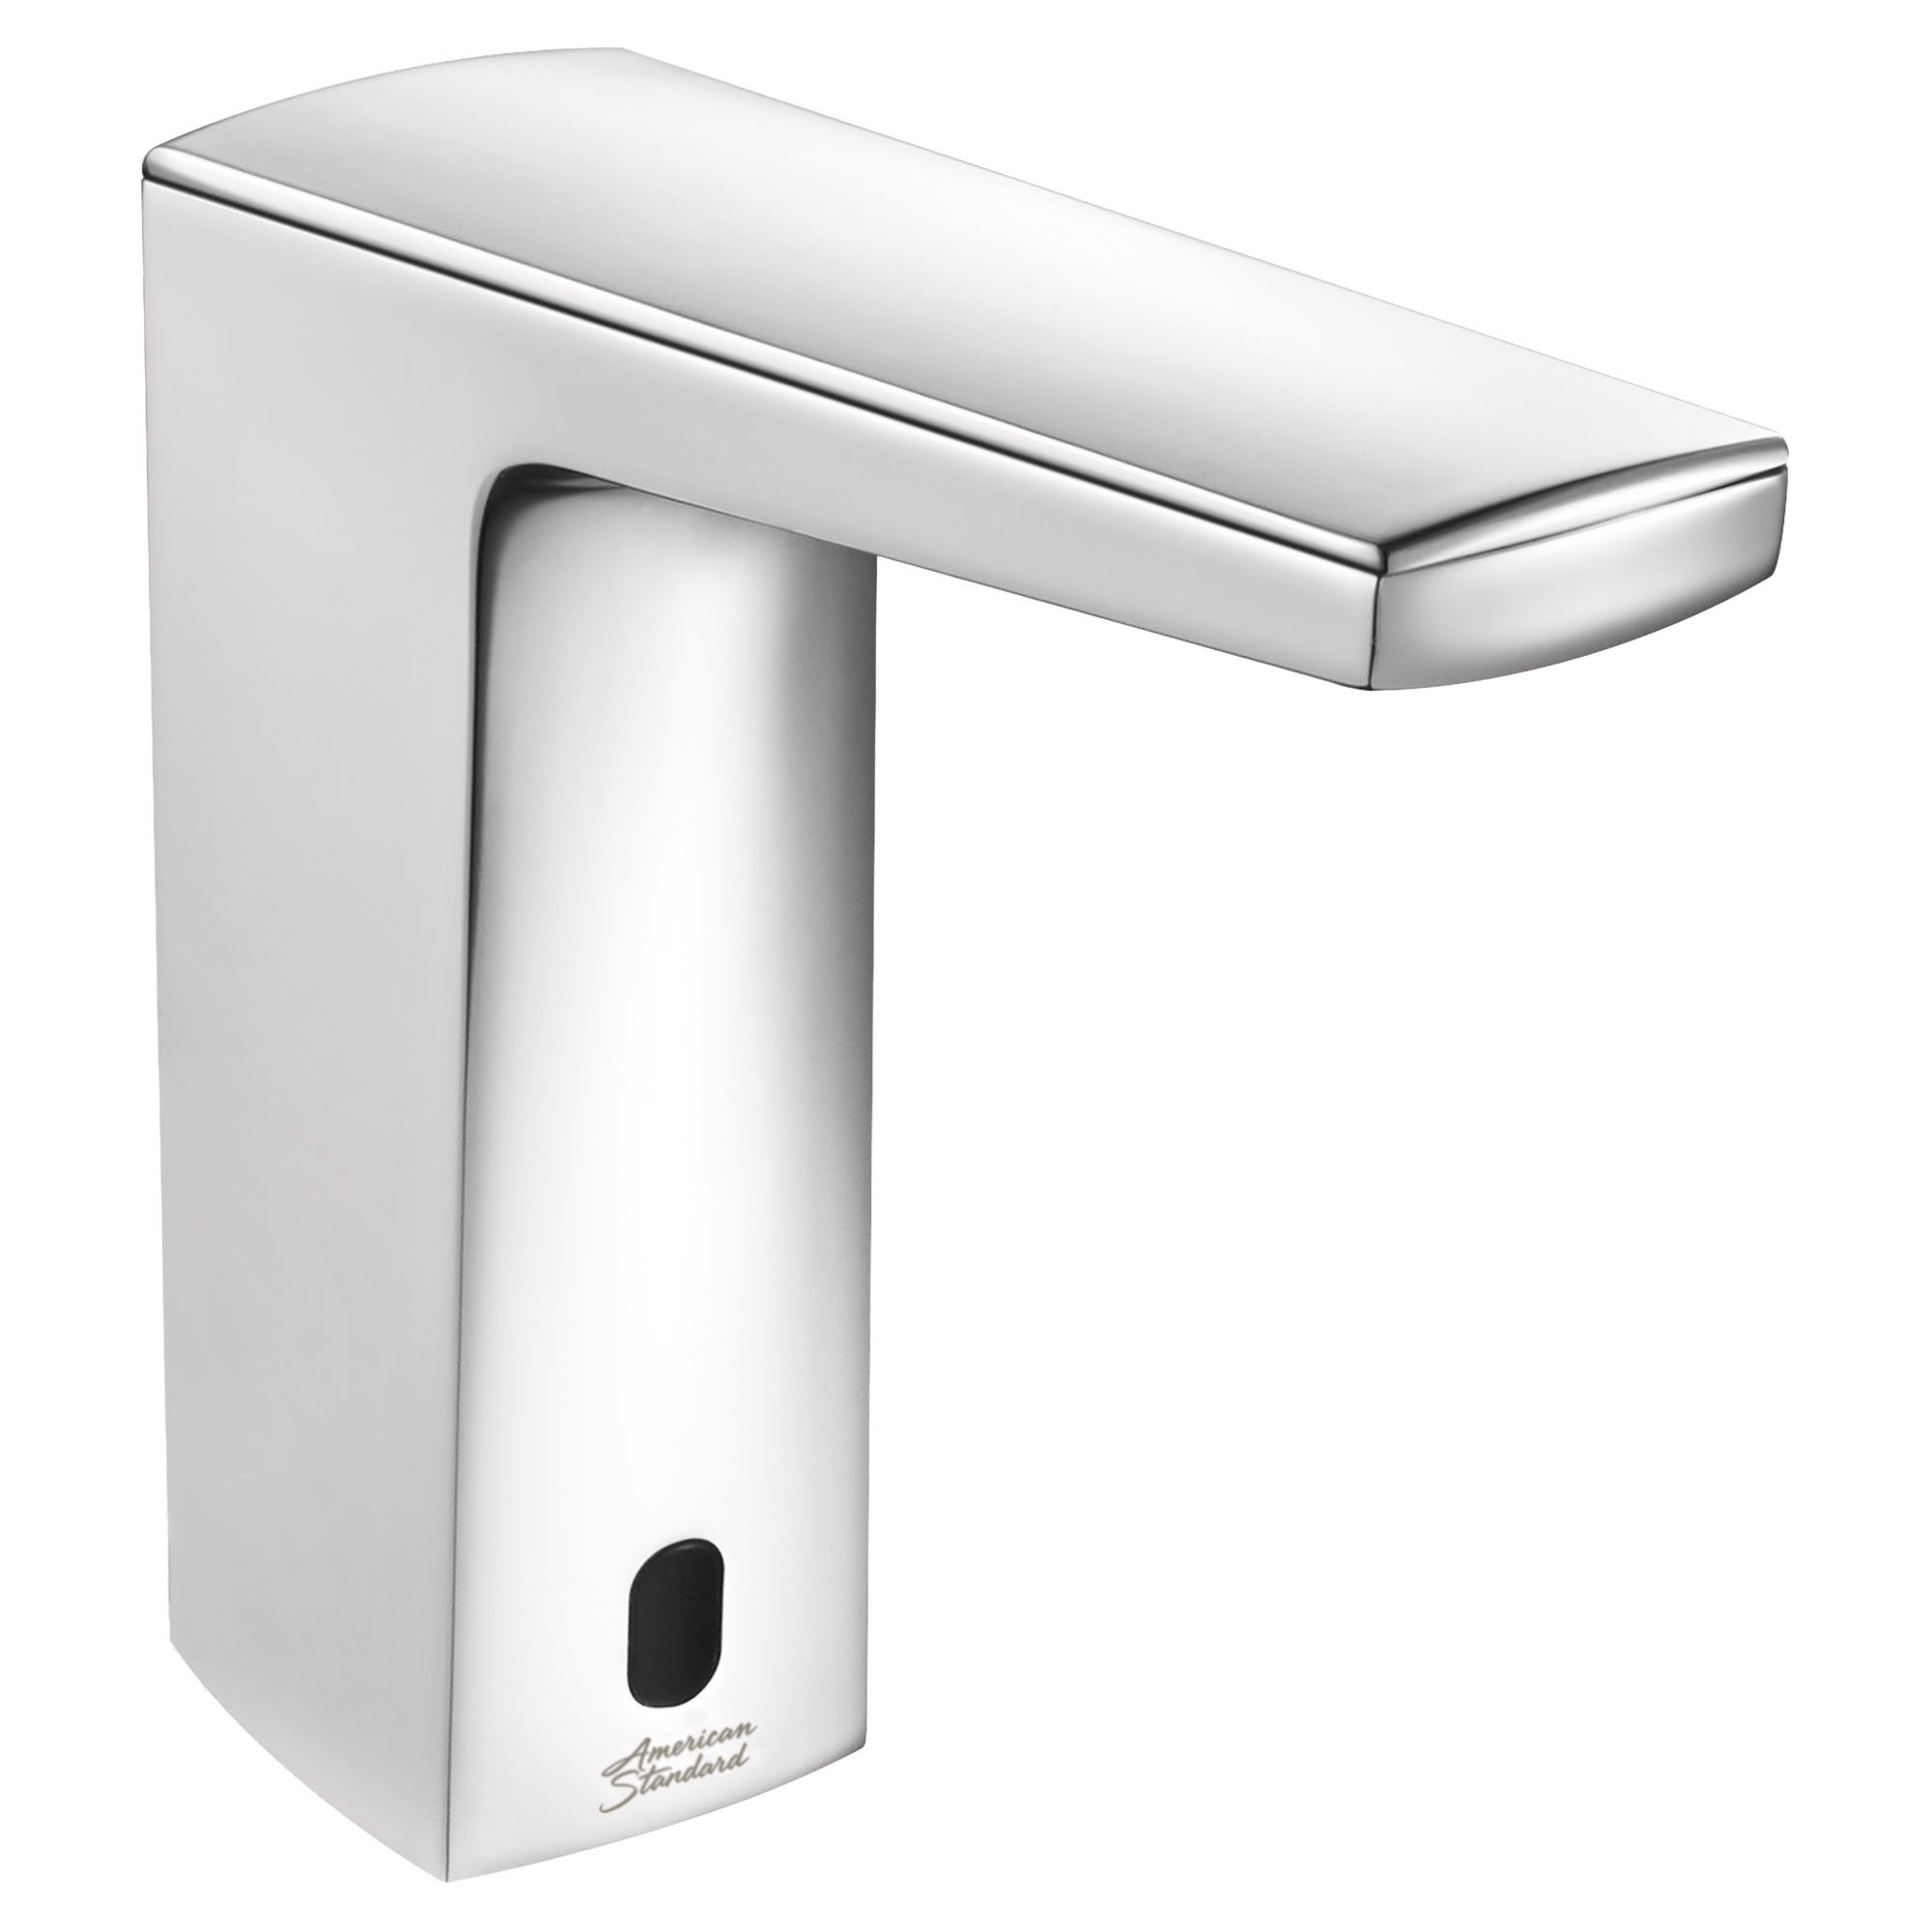 Paradigm™ Selectronic™ Touchless Faucet, Base Model With Above-Deck Mixing, 0.35 gpm/1.3 Lpm